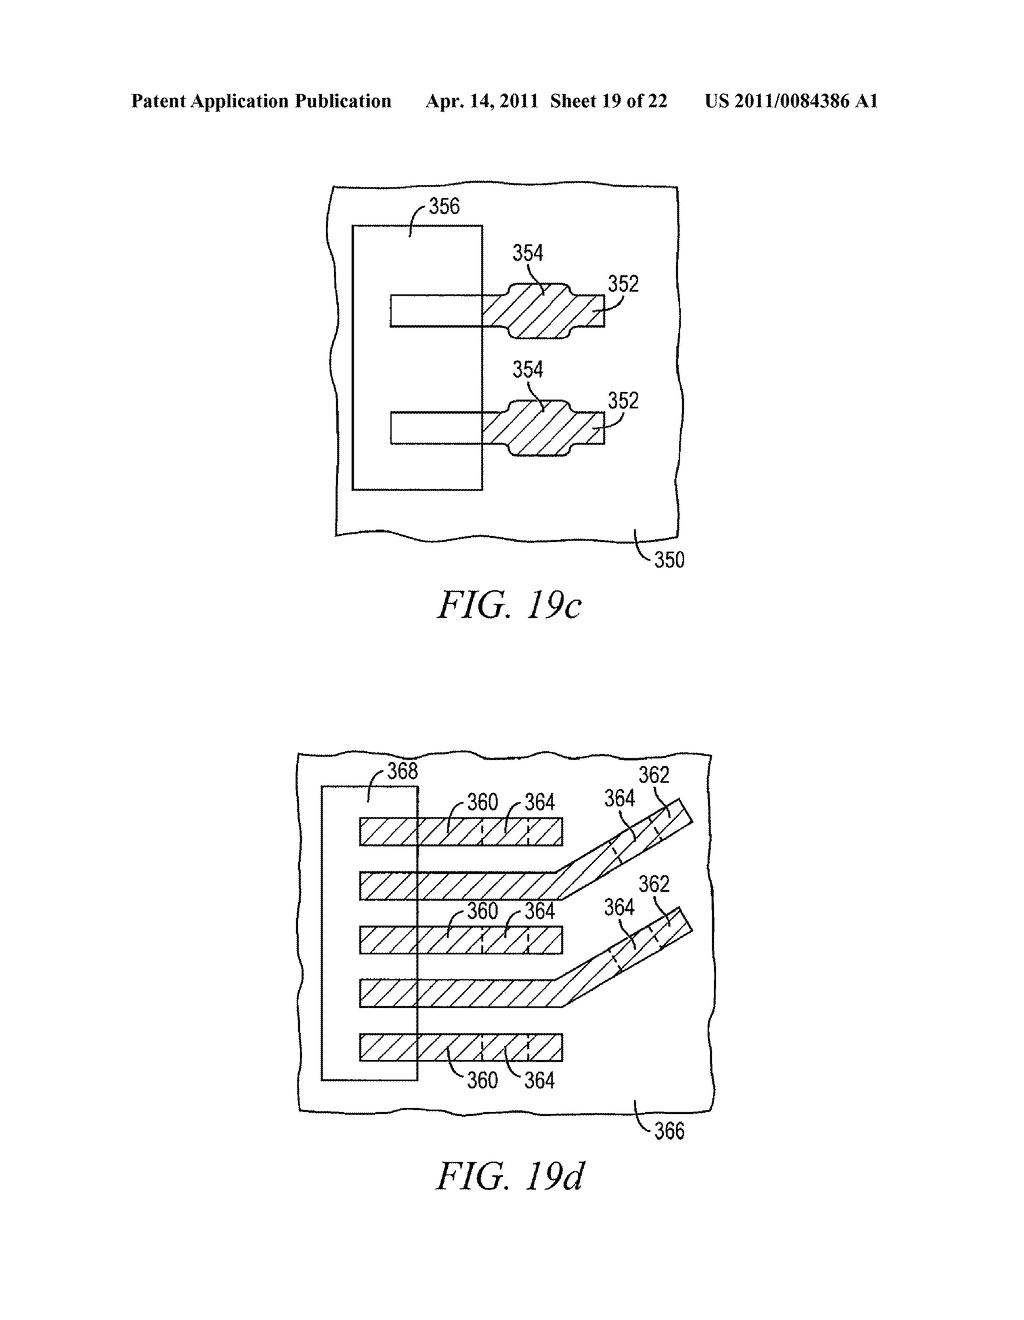 Semiconductor Device and Method of Self-Confinement of Conductive Bump Material During Reflow Without Solder Mask - diagram, schematic, and image 20